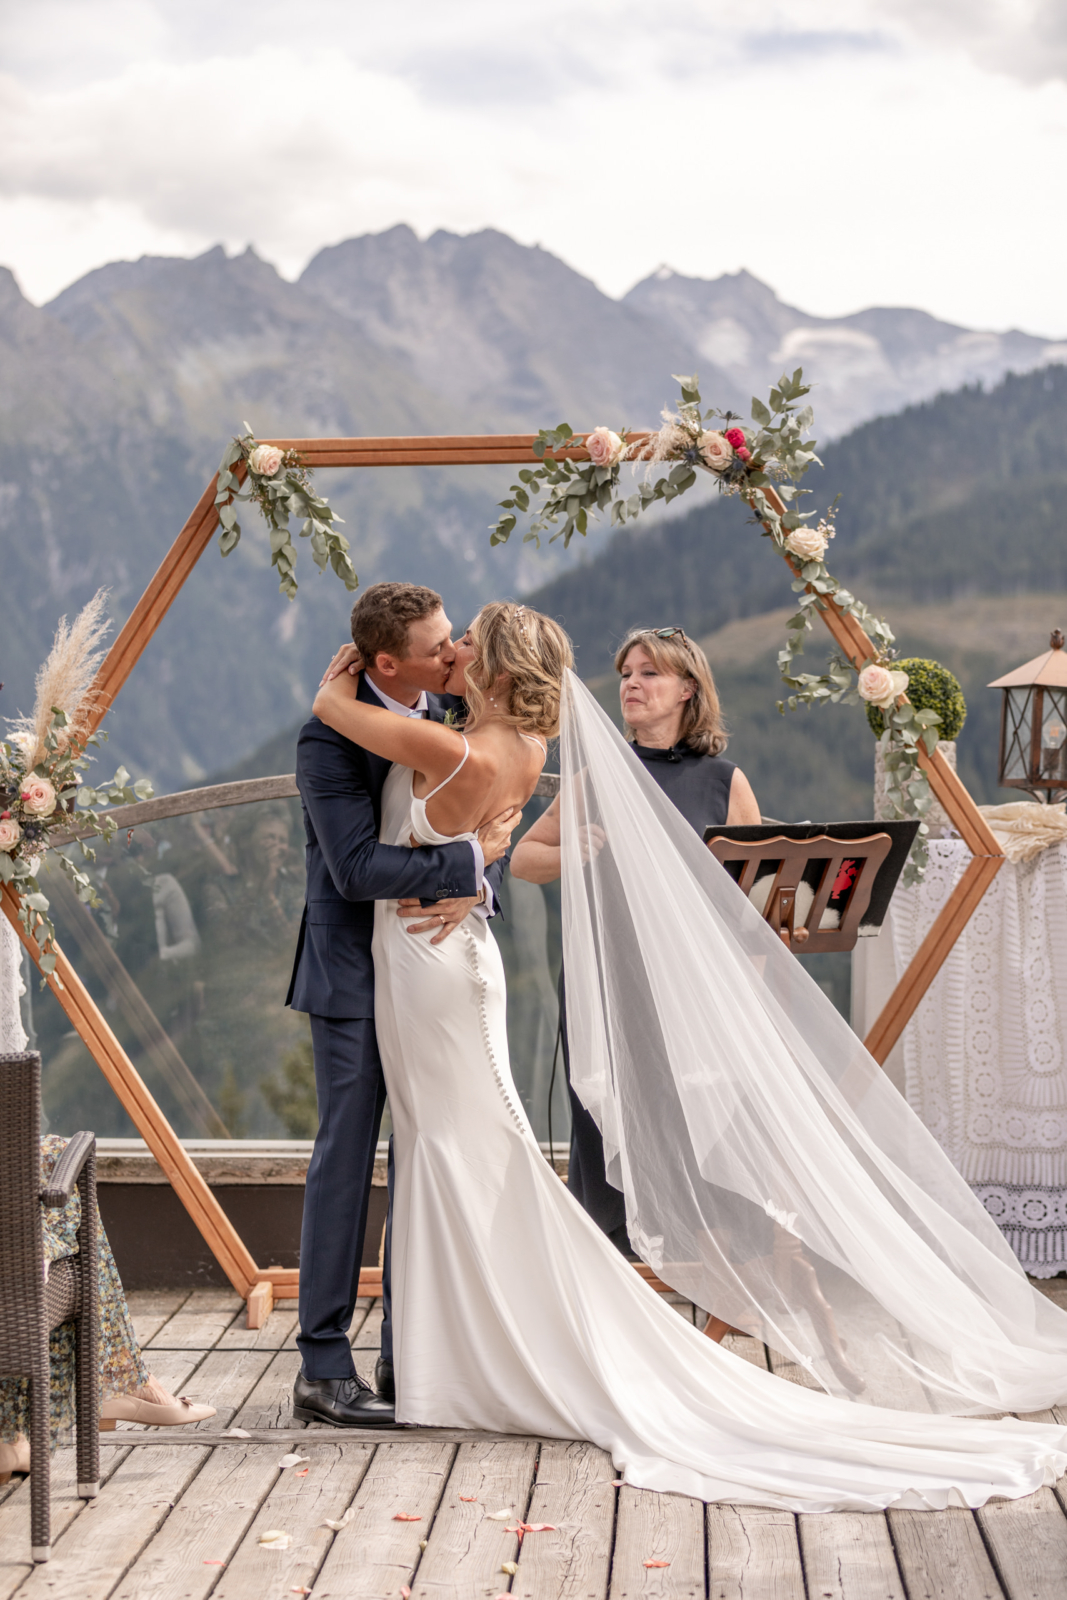 epic first kiss at the destination wedding in the mountains in Austria